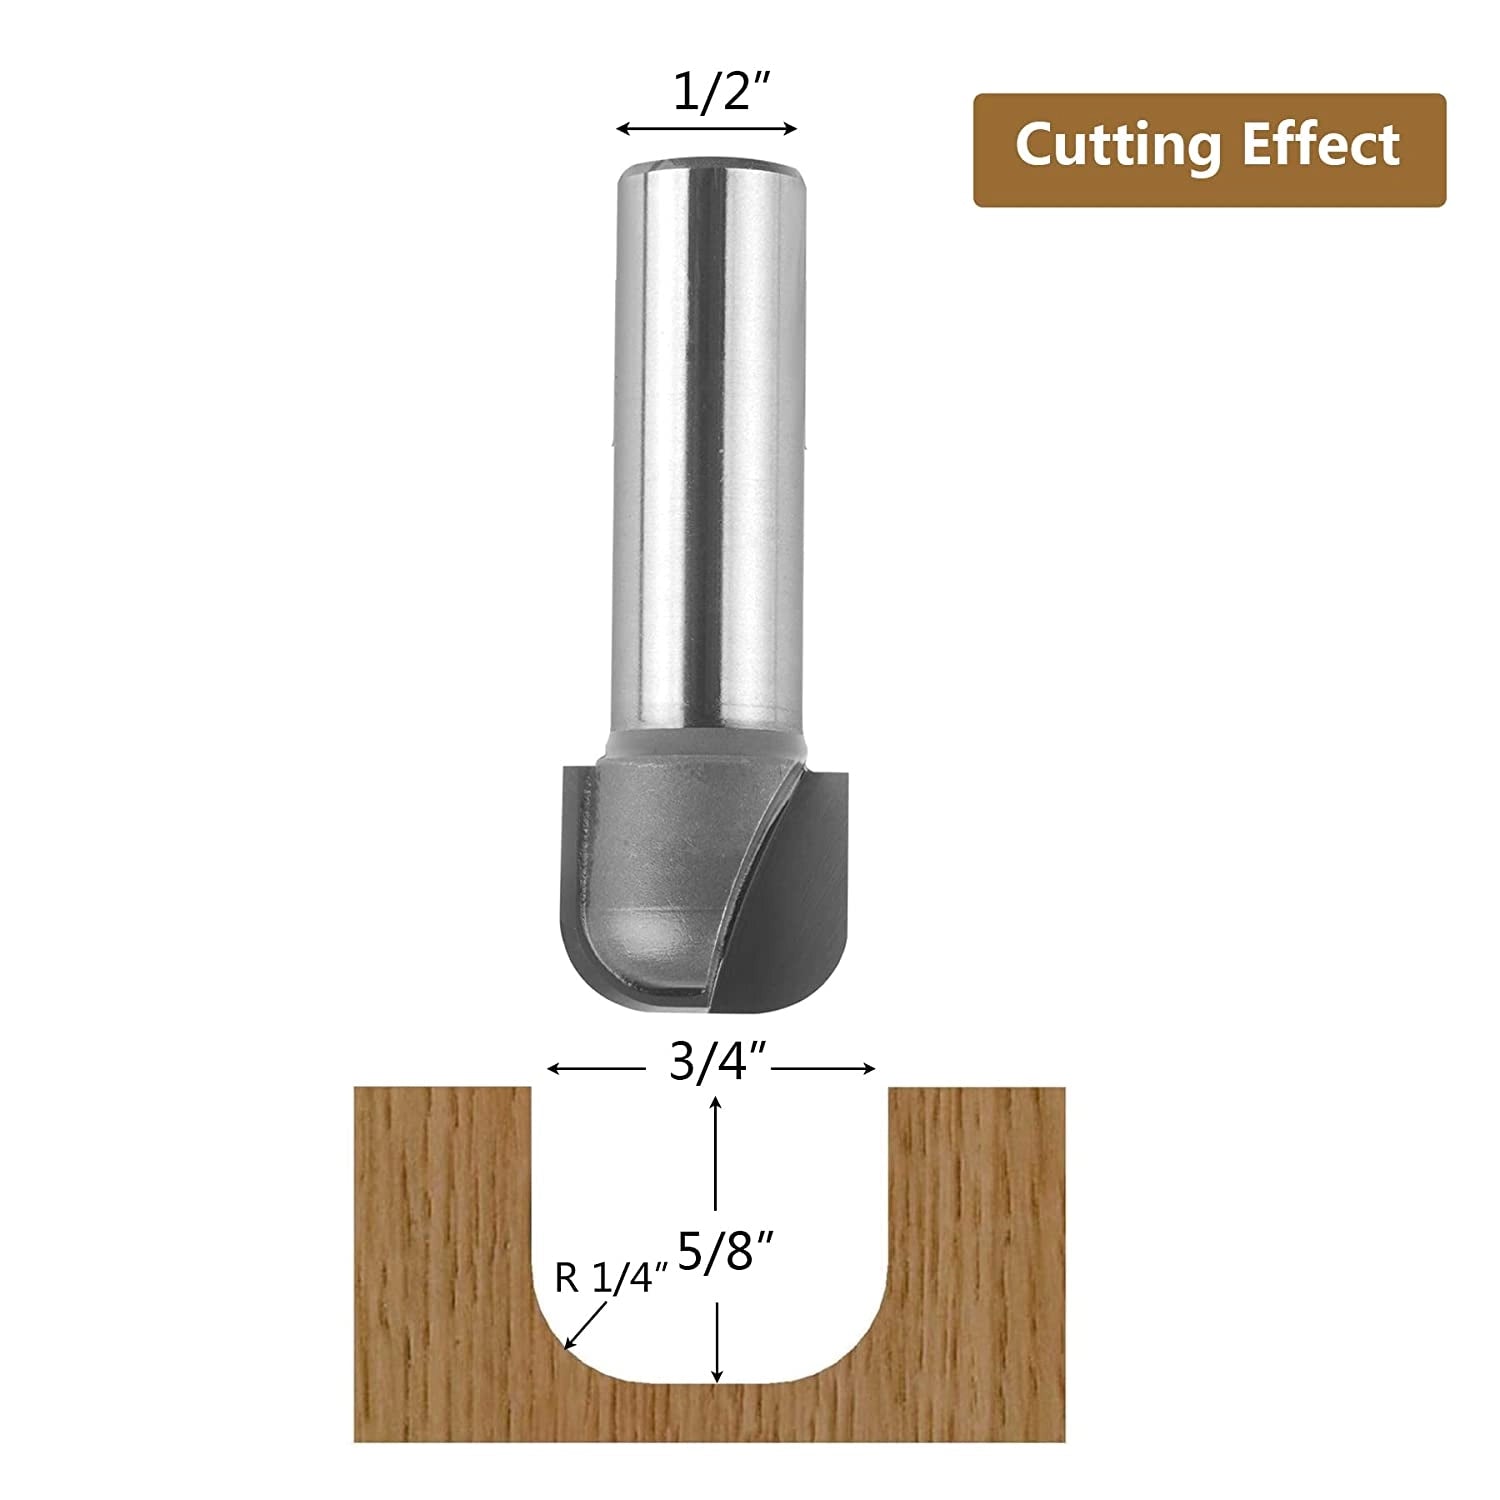 1/2" SH Bowl & Tray Router Bit 3/4 Dia 2 Flute Woodwork Milling SpeTool